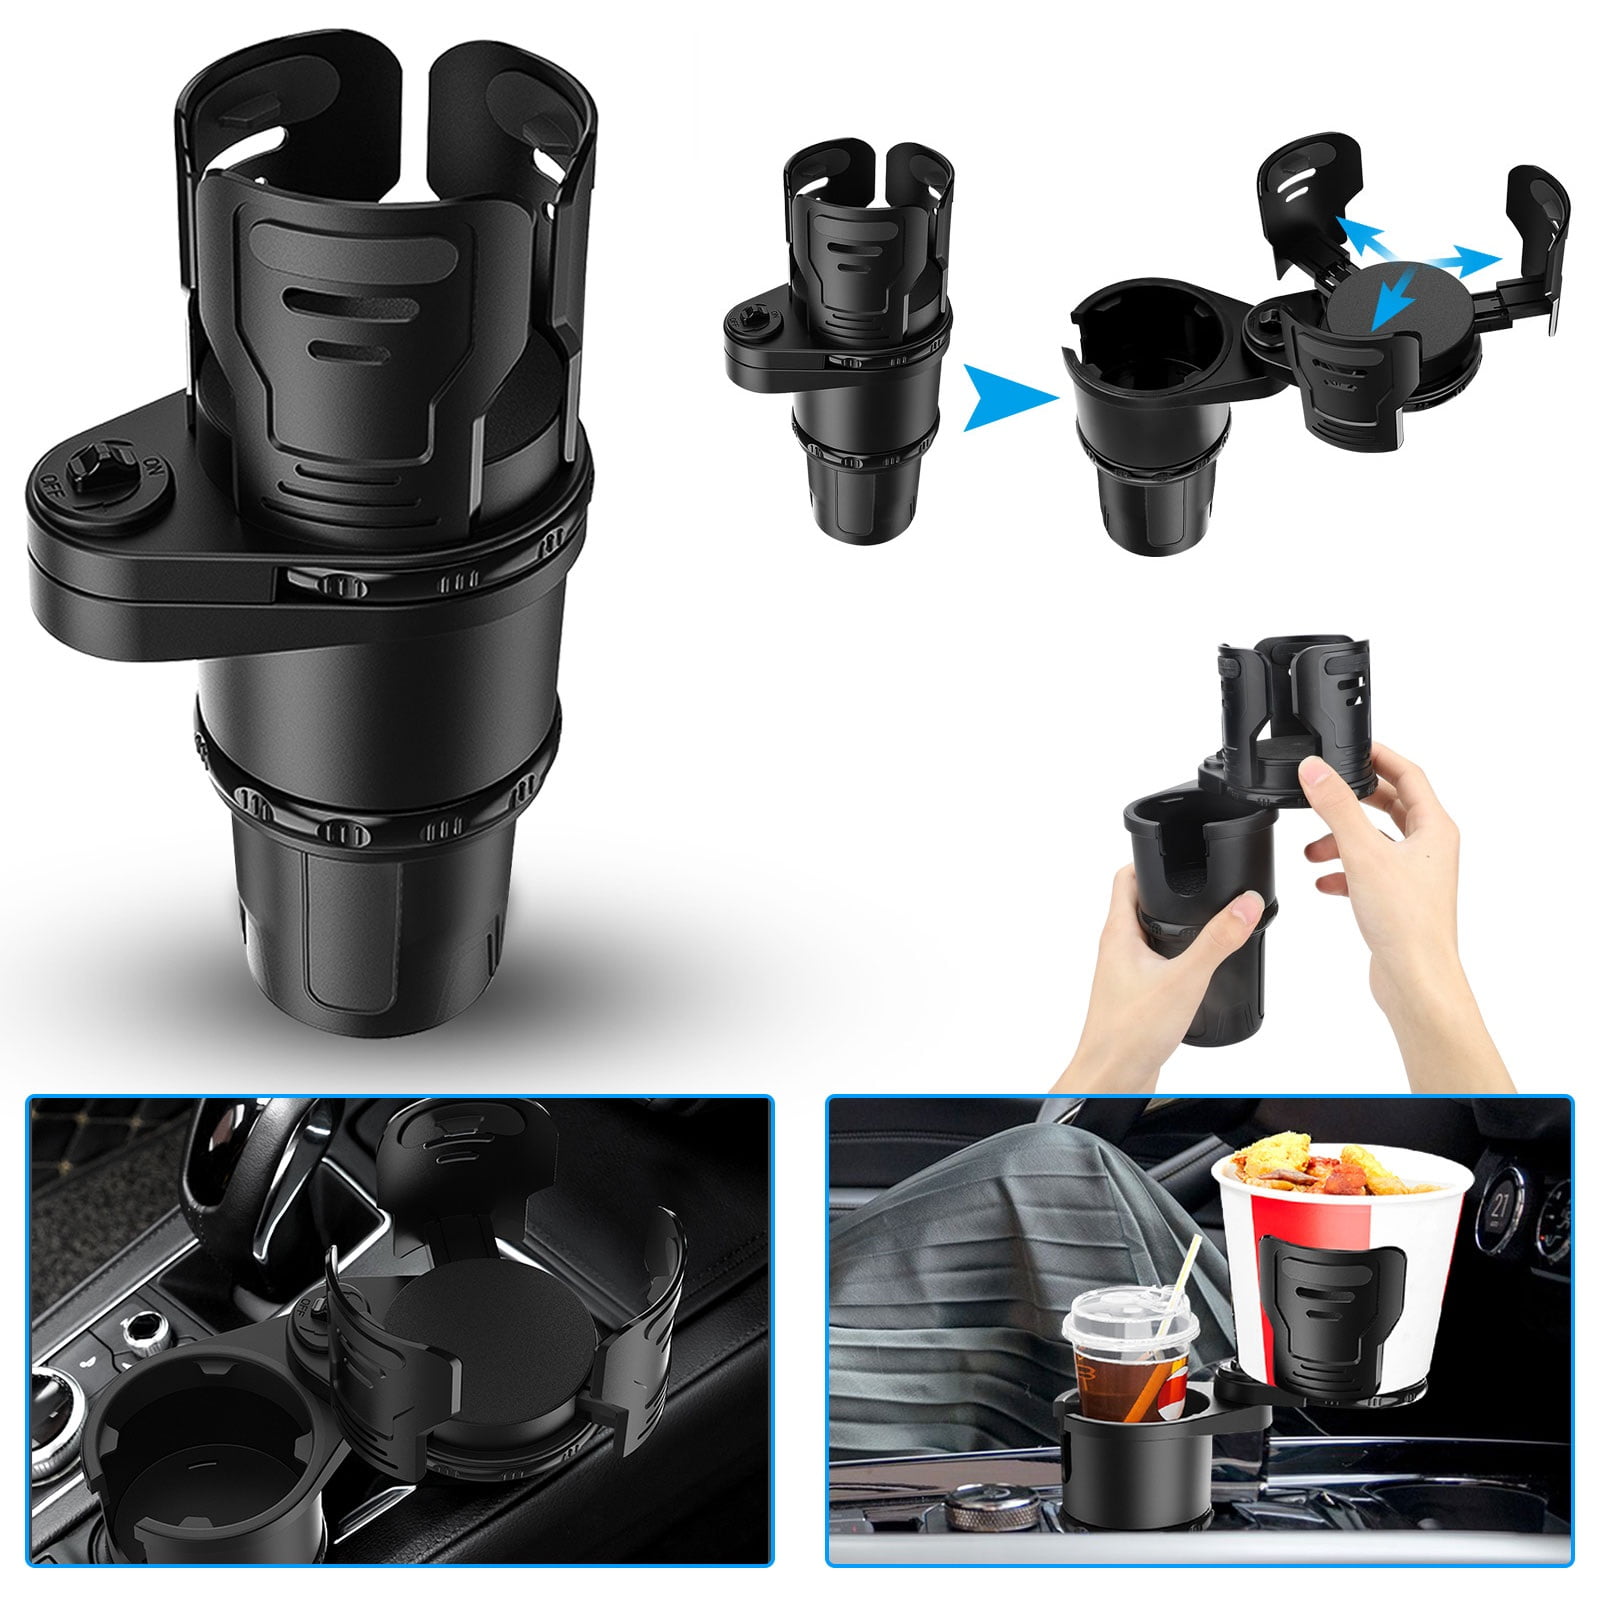 TSV Car Cup Holder Expander Adapter, Multifunctional Auto Cup Mount Extender  Adapter with Adjustable Base, Water Drink Holder 360 Rotating for 3 - 5.9  Coffee Drinks Bottles, Black 